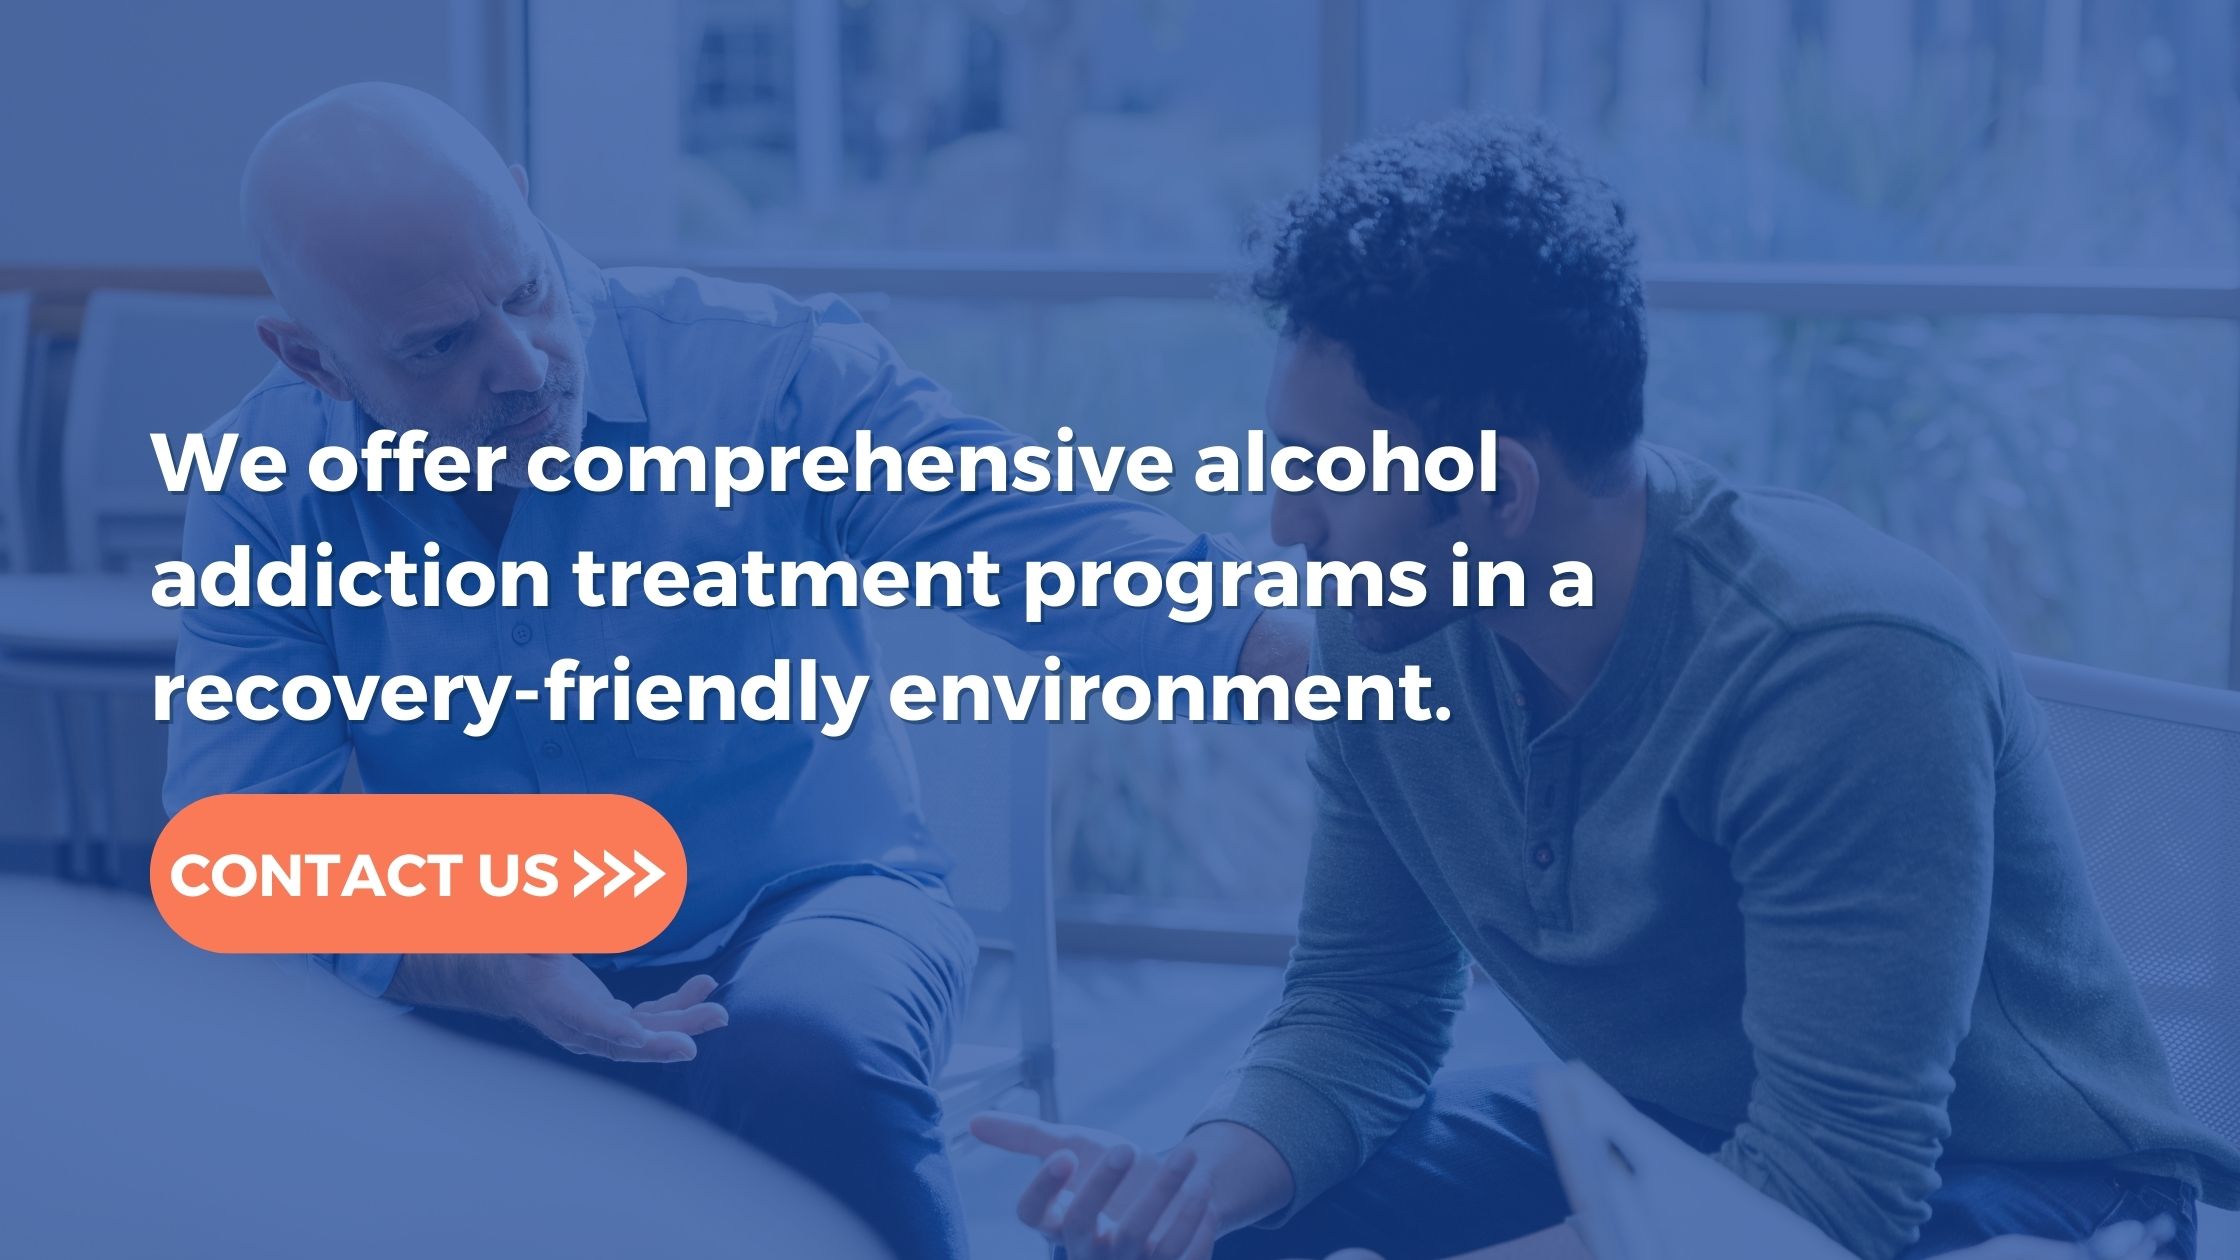 Contact us today. We offer in-person alcohol rehab